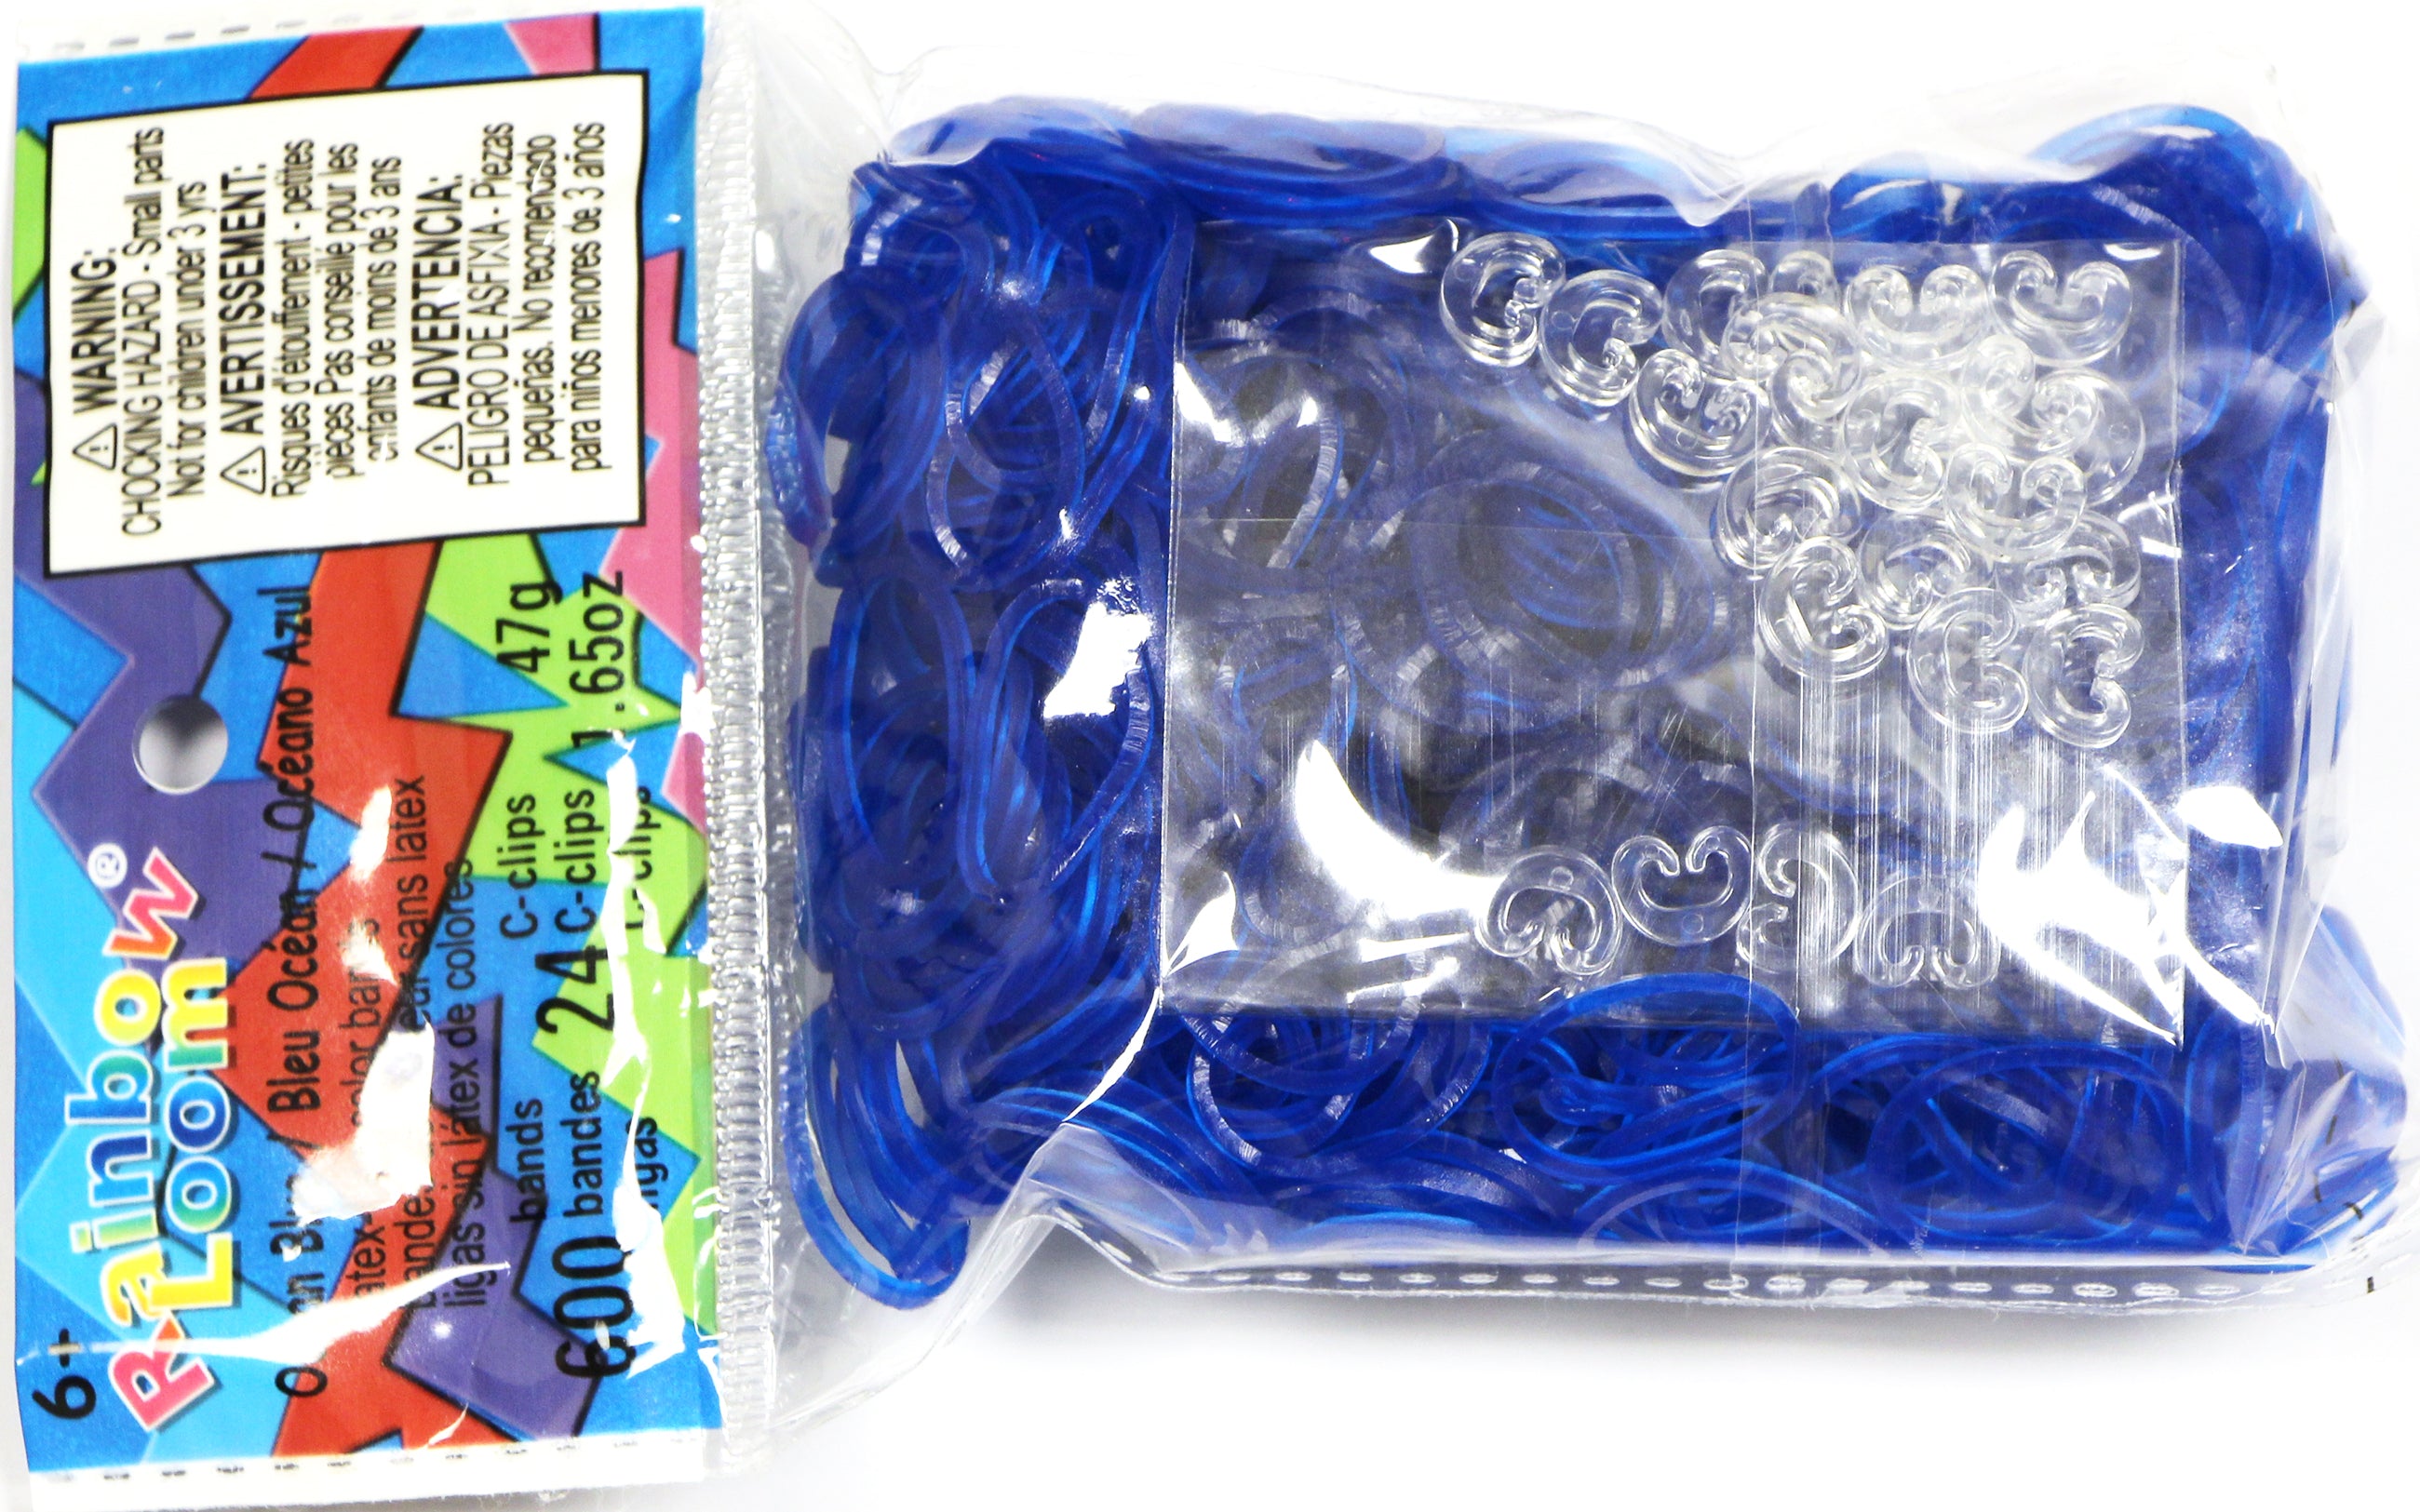  Rainbow Loom & Refill Band Deals - Queen of Free